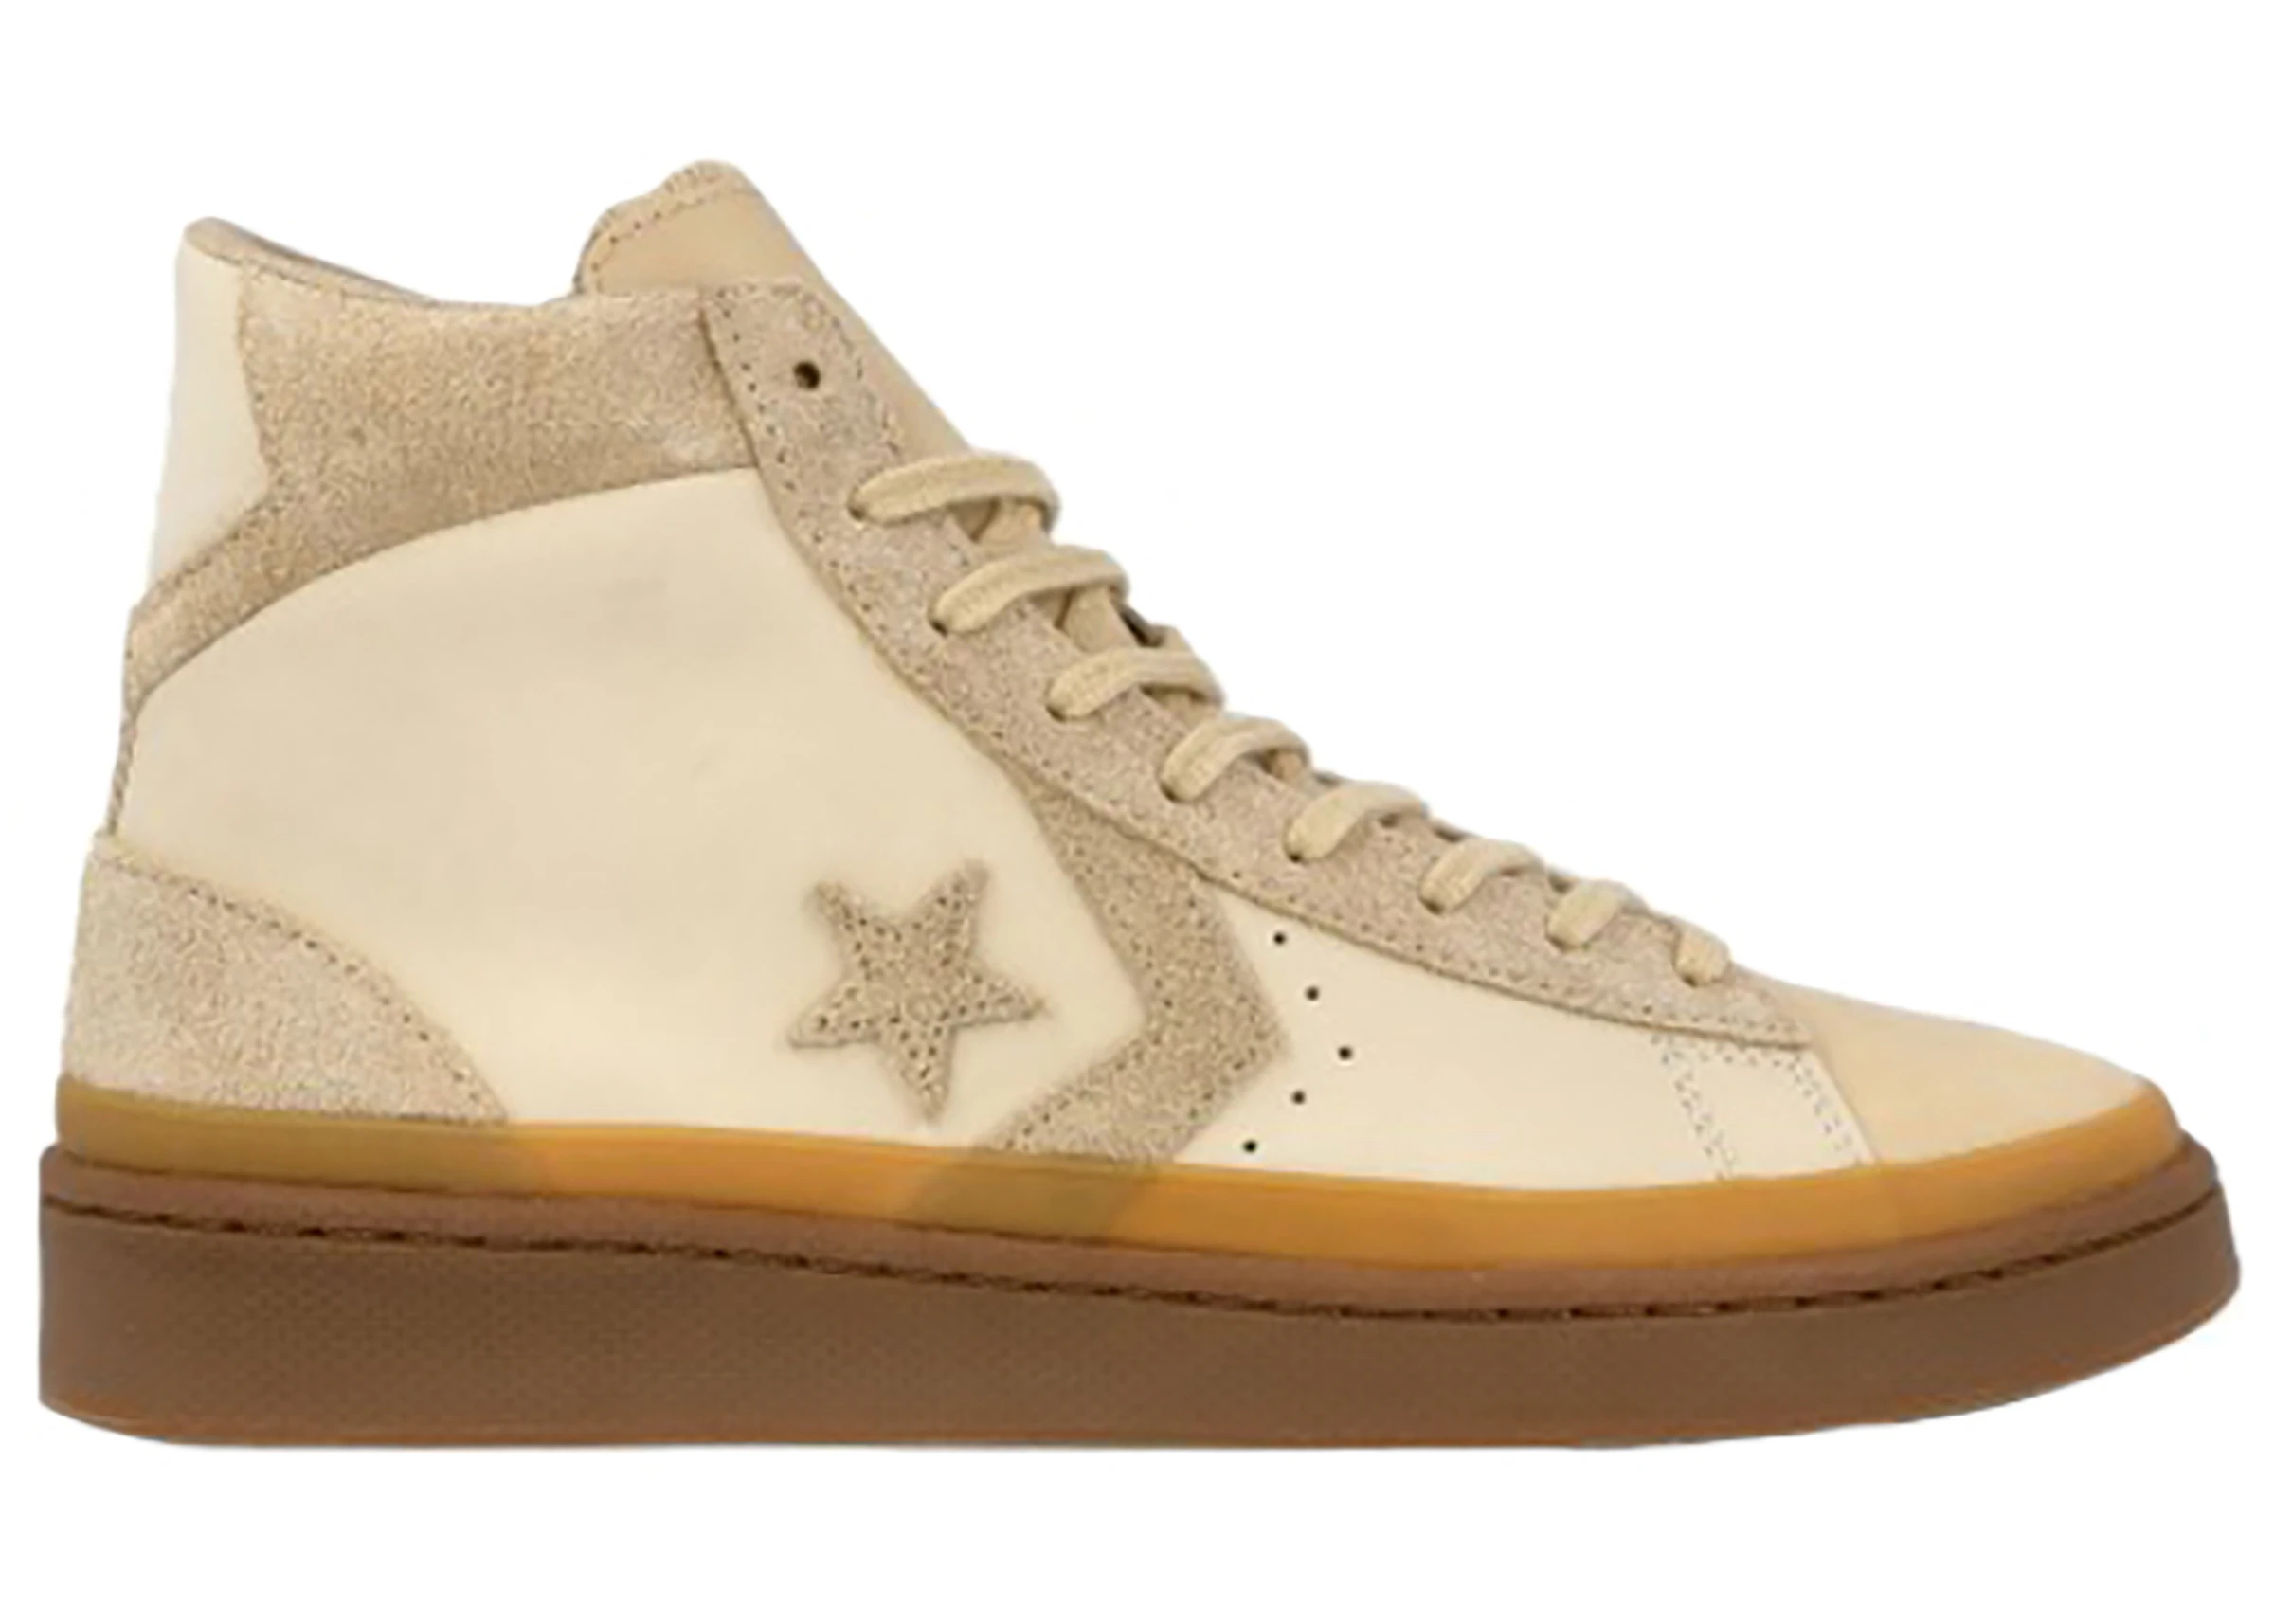 Converse Pro Leather 2000s Pack Reese Forbes - 166595C - US